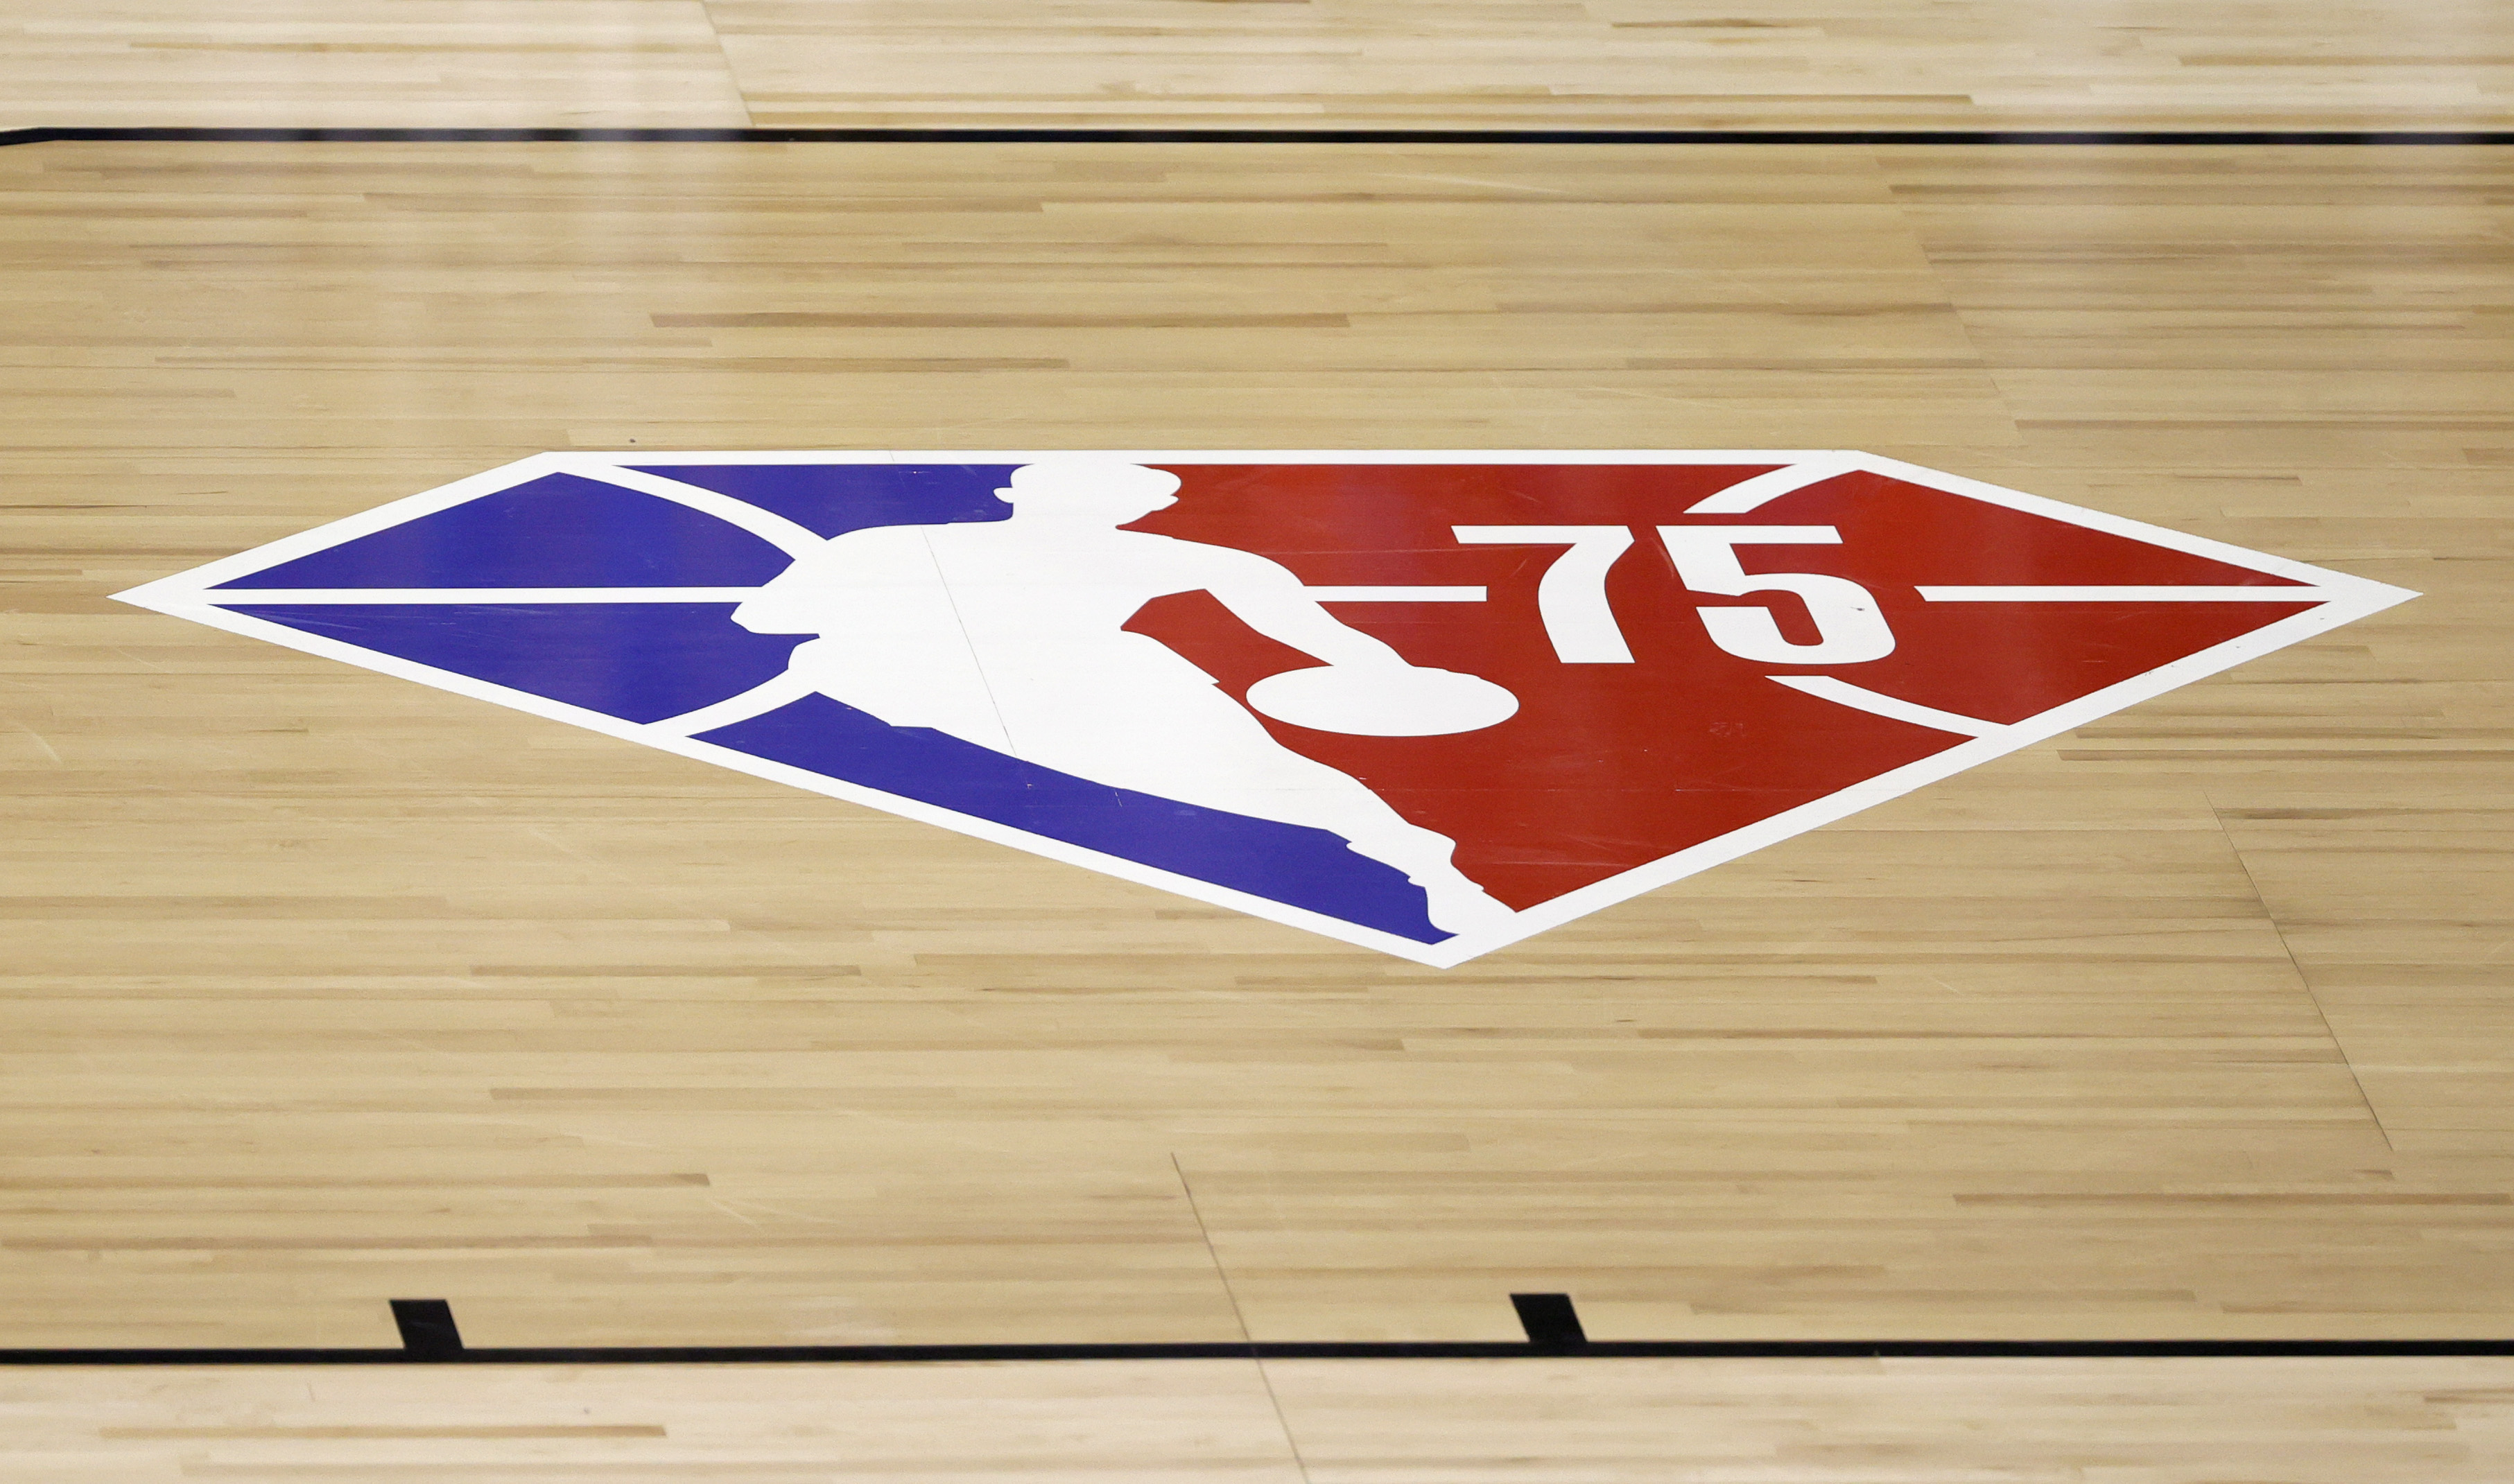 Report: 2021-22 NBA Season Schedule Expected to Be Released in Next 7-10 Days